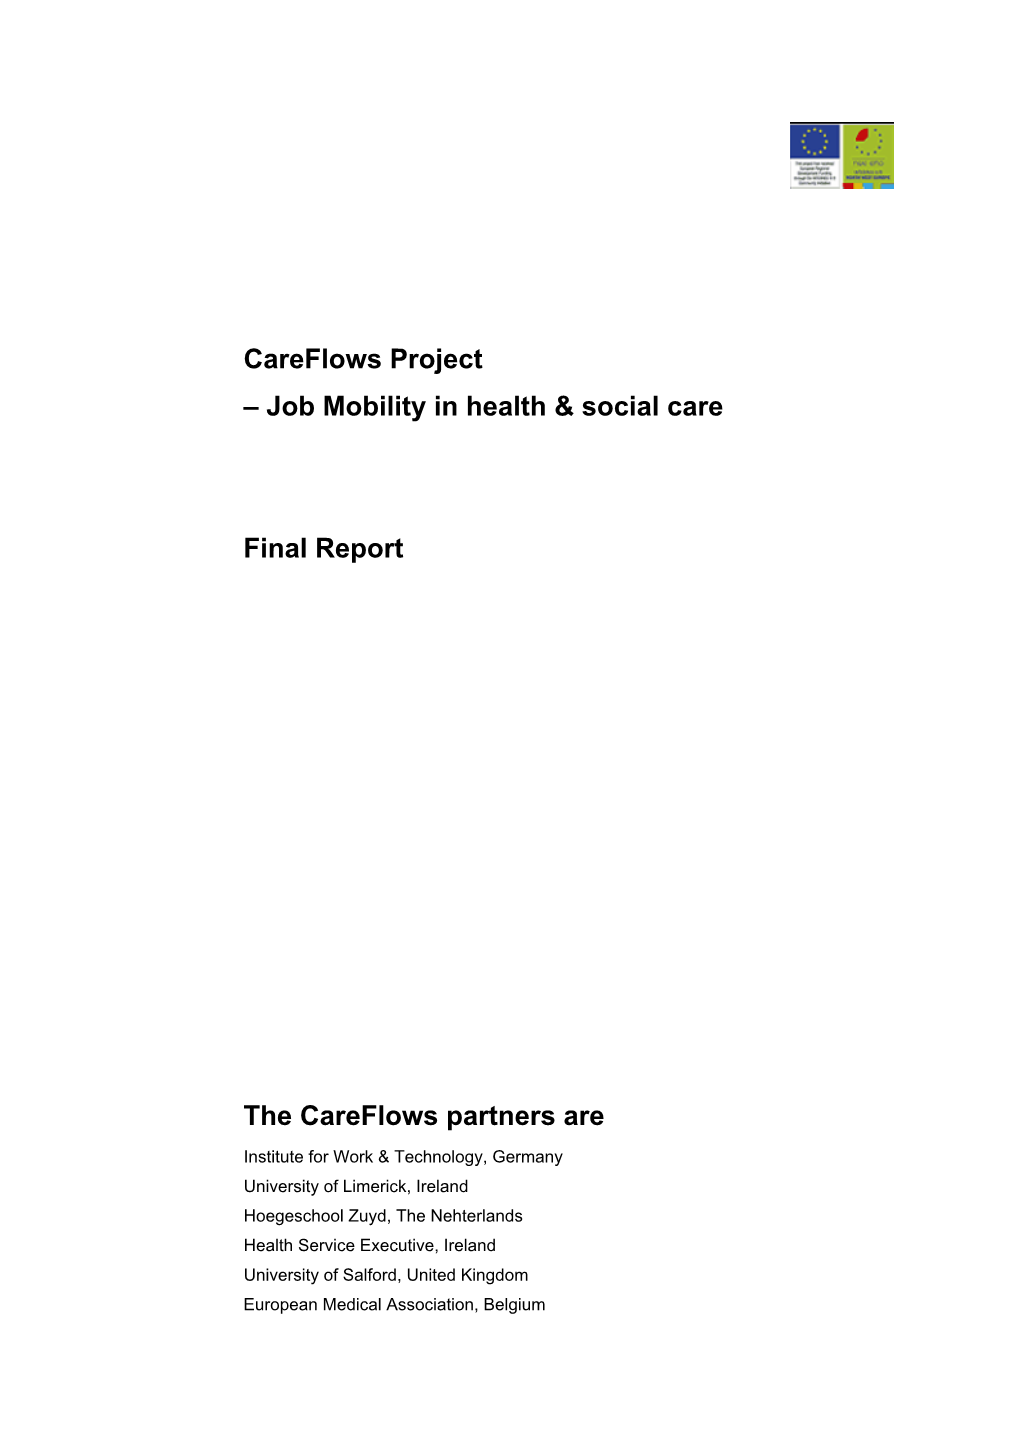 Job Mobility in Health & Social Care Final Report the Careflows